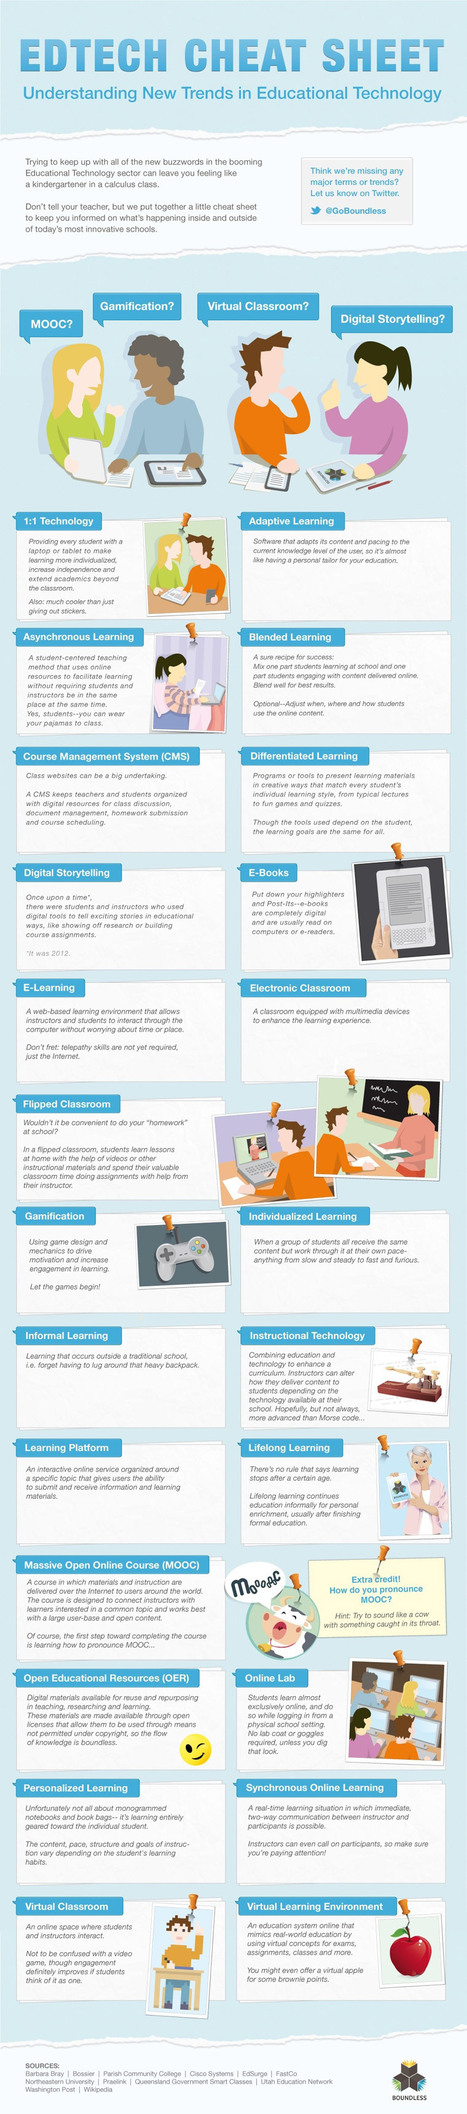 24 Ed-Tech Terms You Should Know [Infographic] | 21st Century Learning and Teaching | Scoop.it